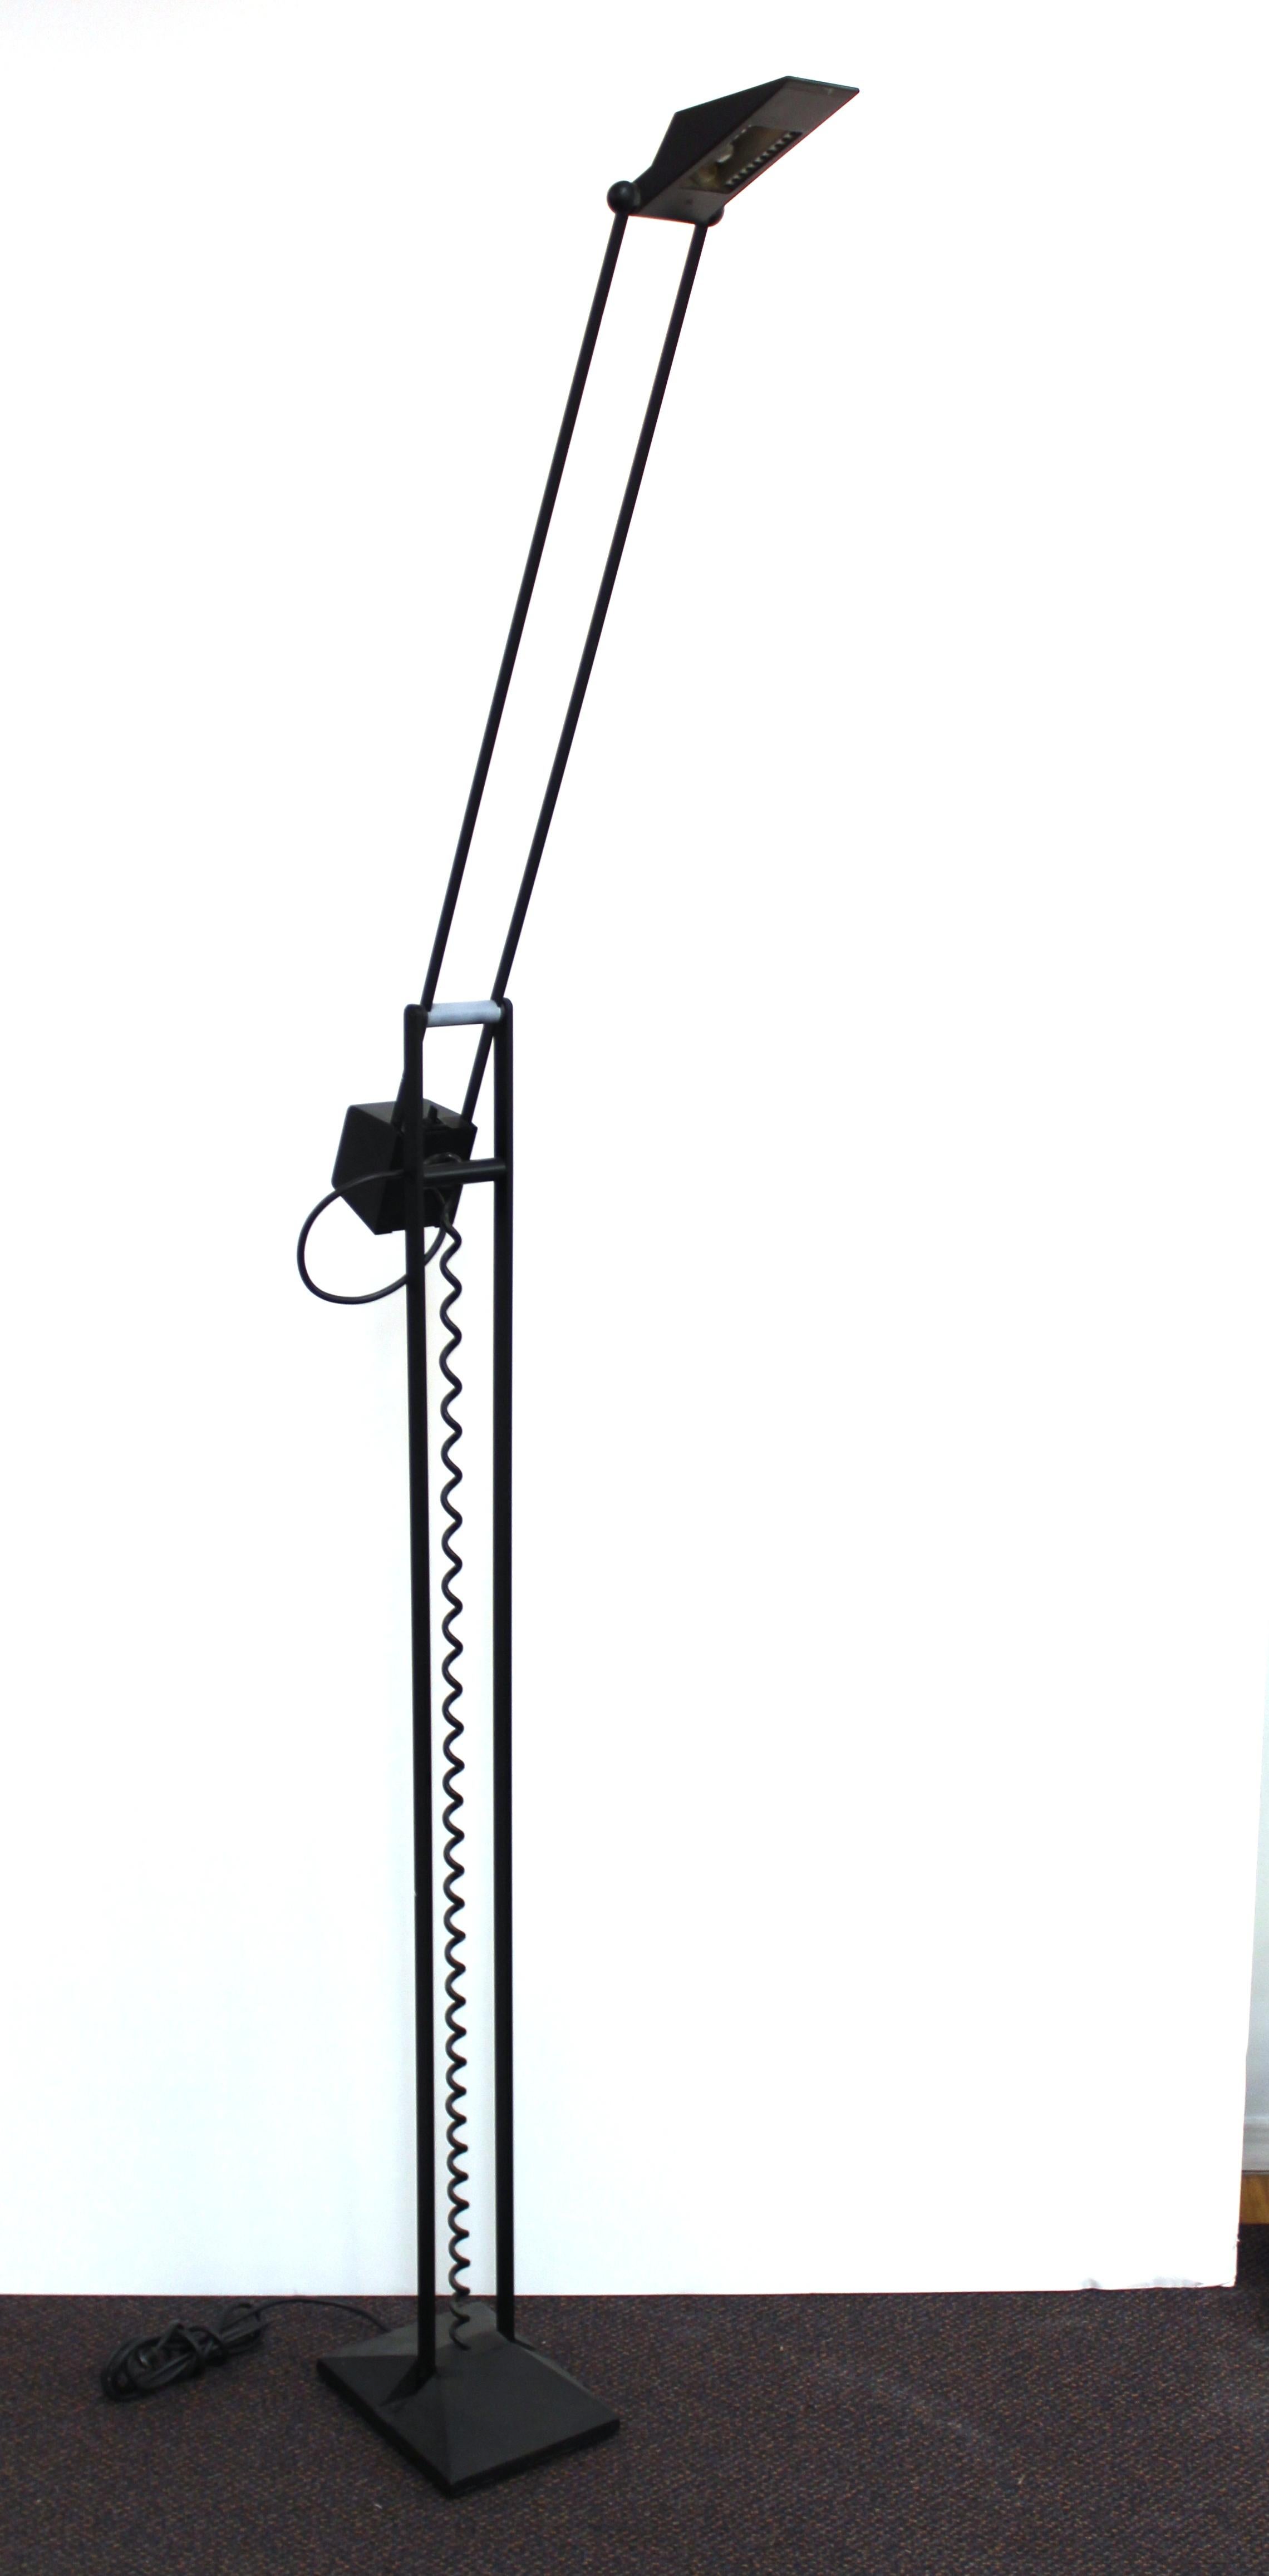 American modern articulated floor lamp in black lacquered steel and iron, designed by American maker Artup in the 1980s. The piece has a counterweight balance system and is in great vintage condition.